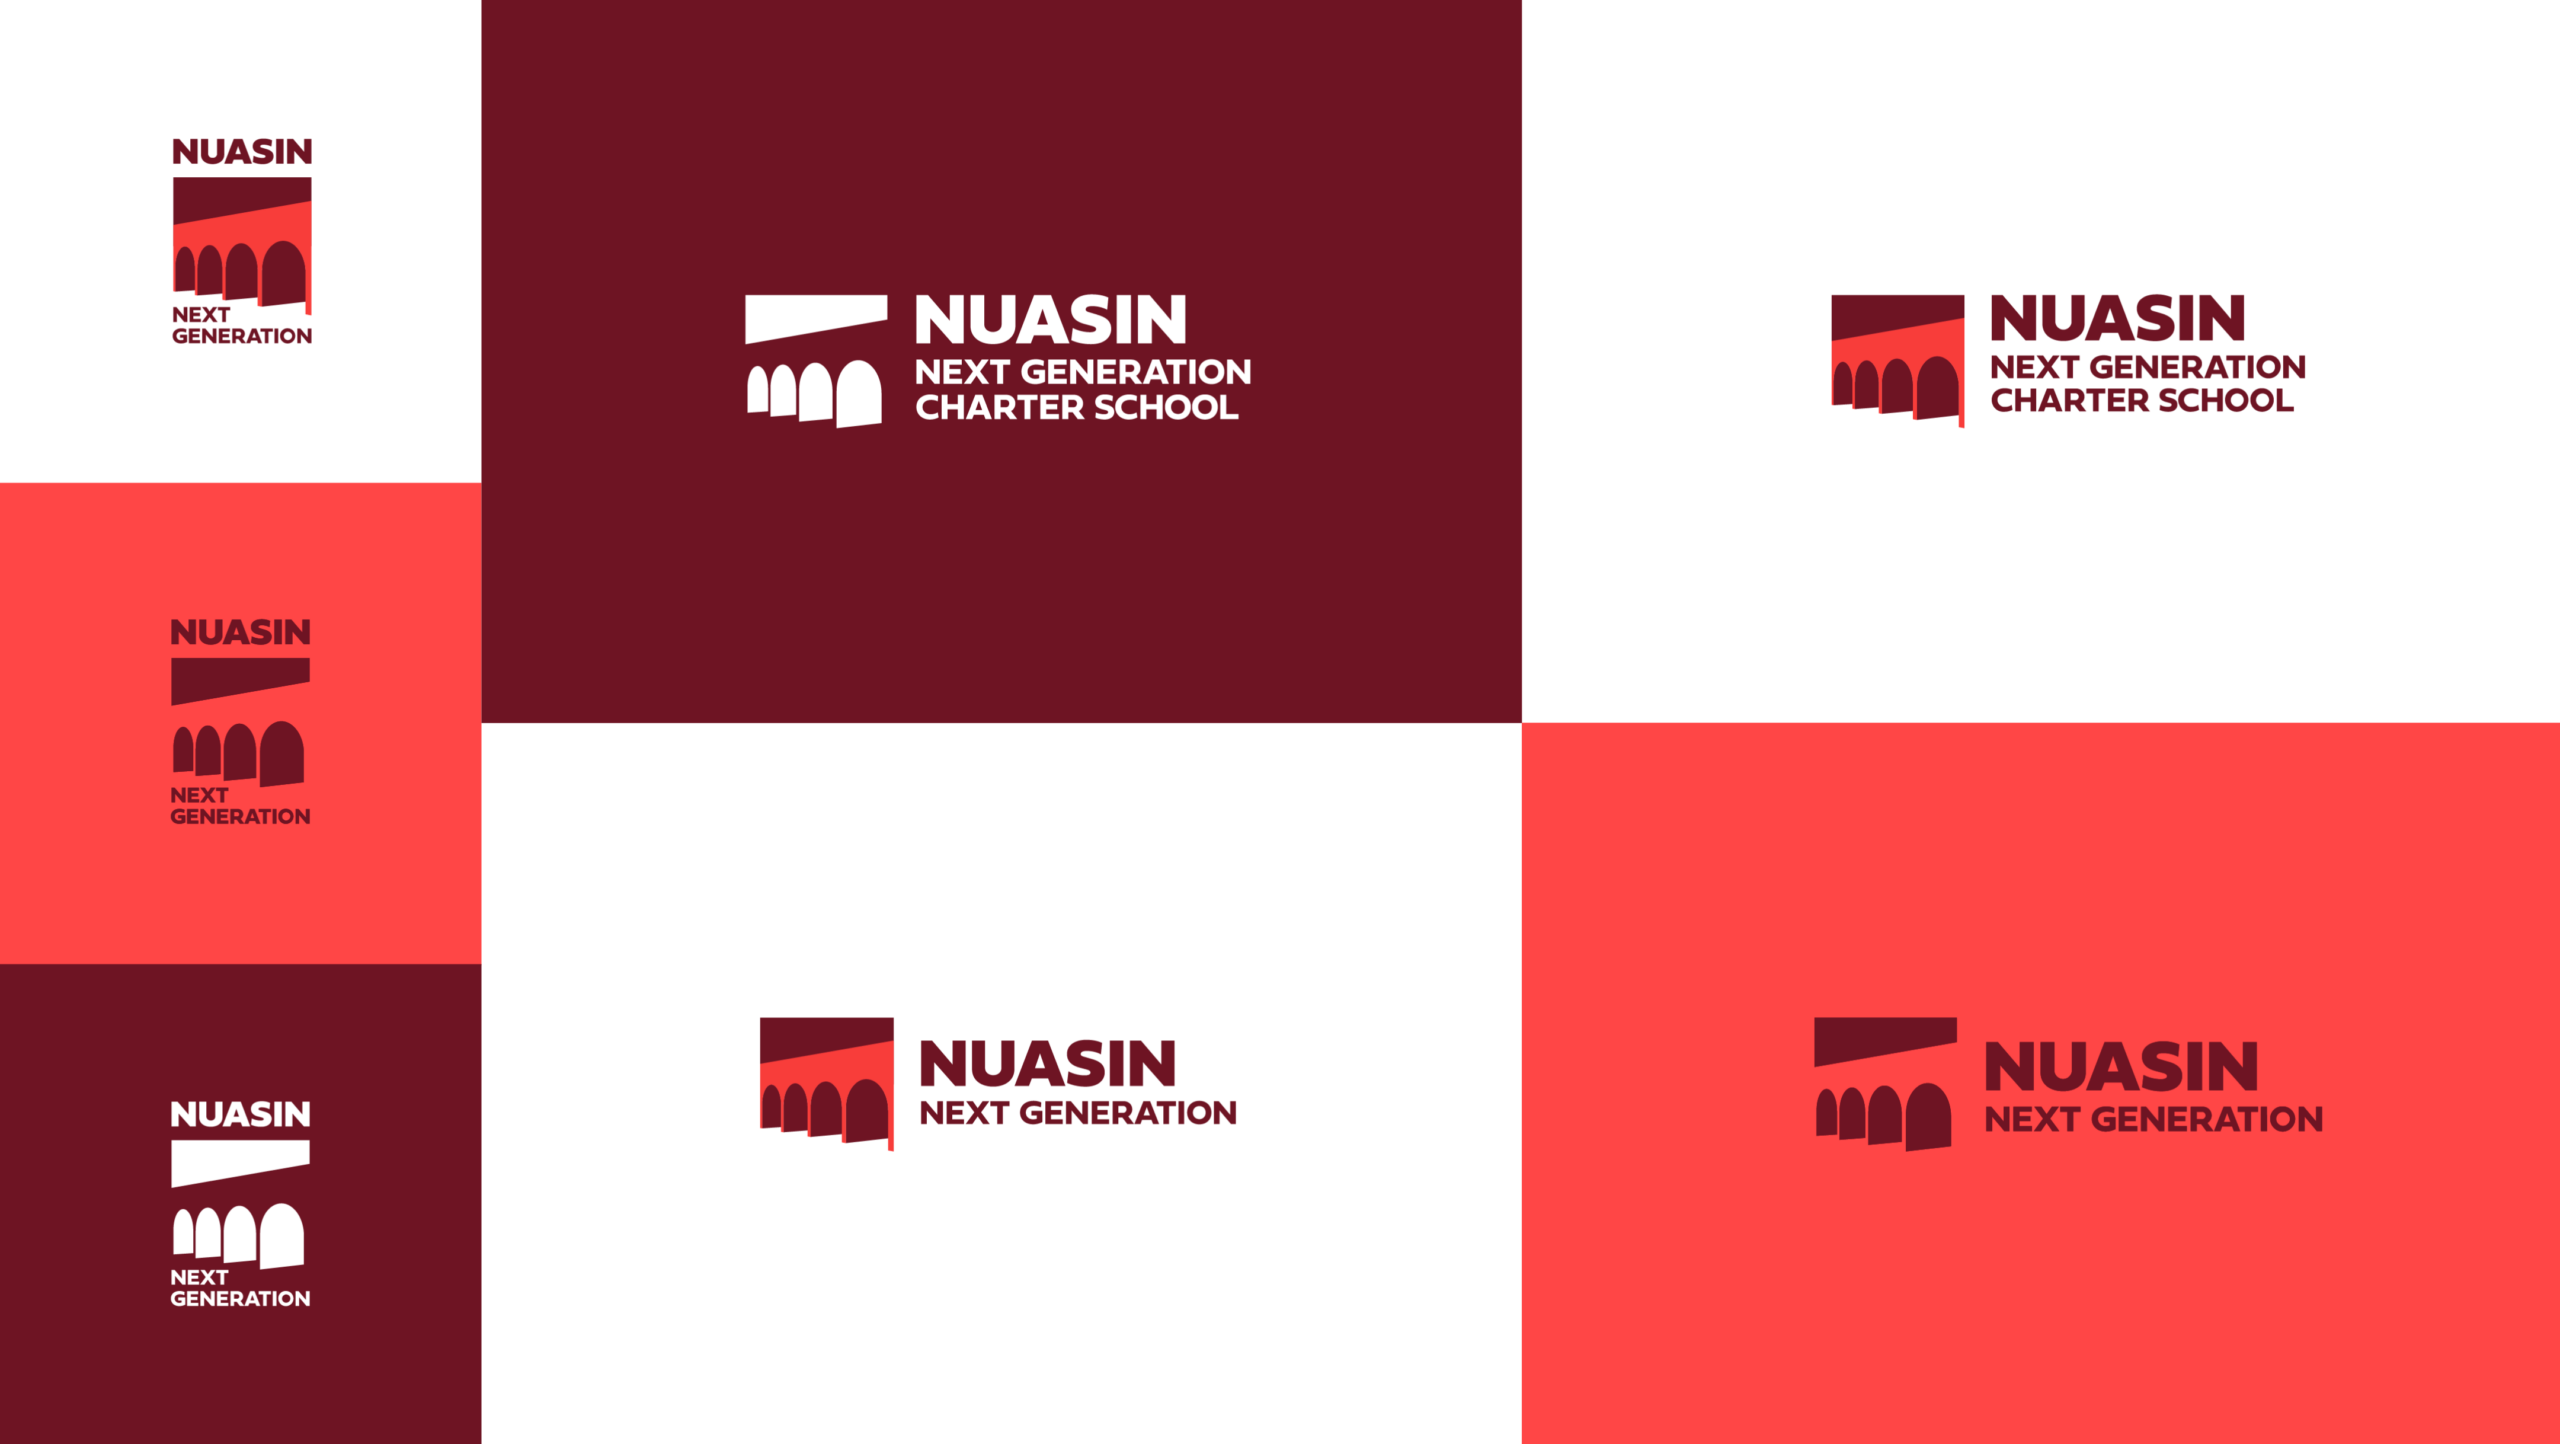 Nuasin Next Generation Brand and Logo Palette